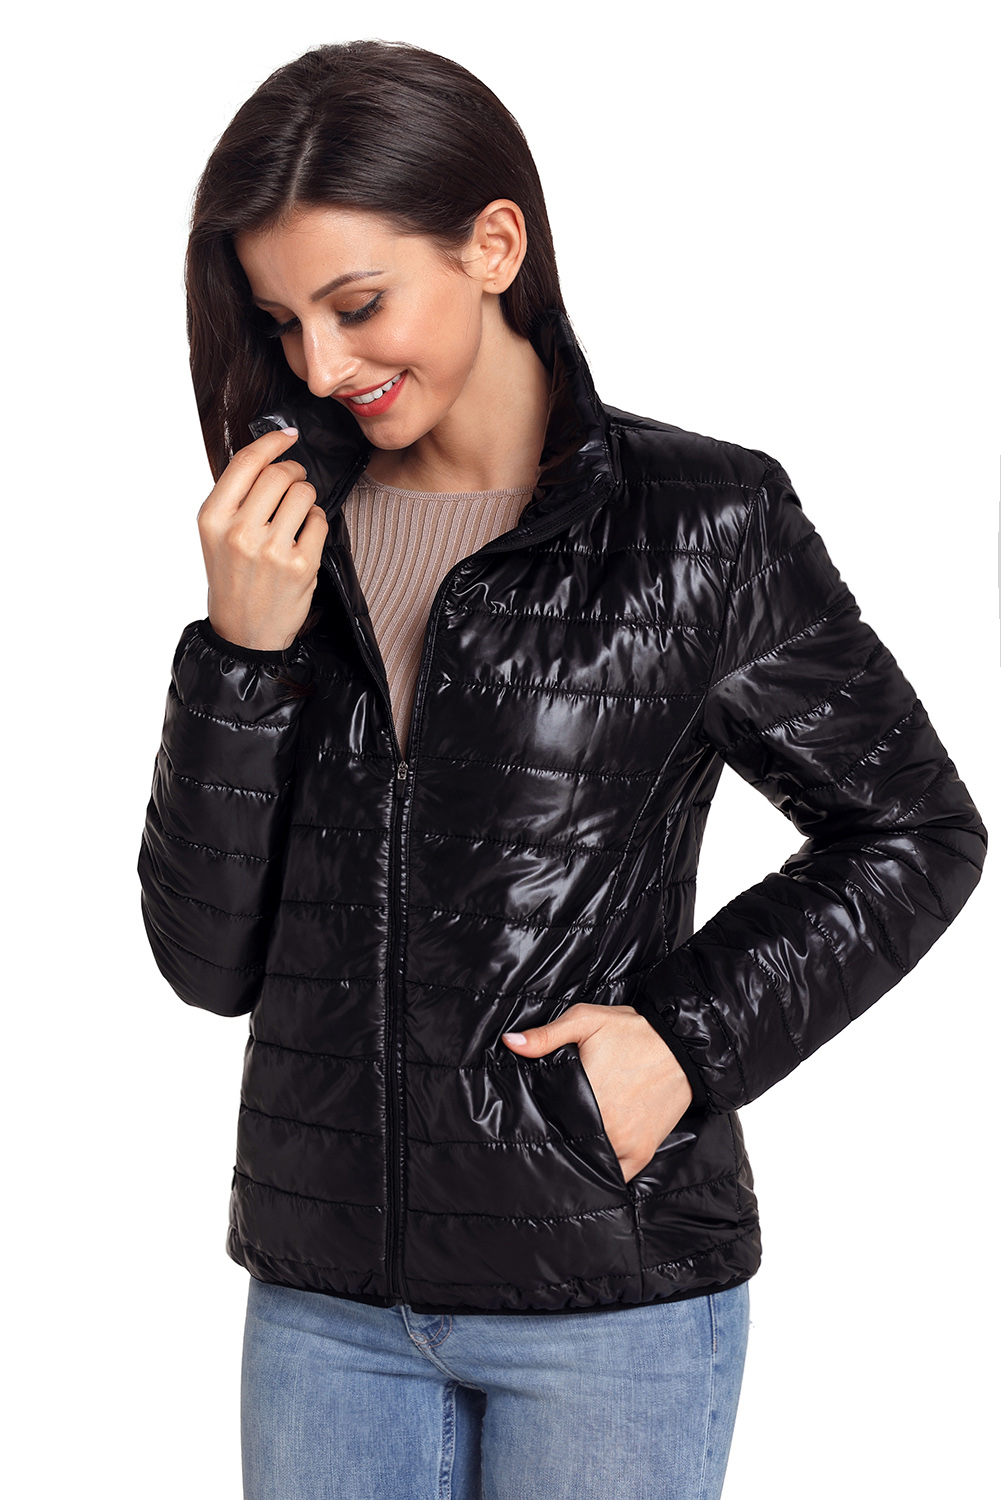 BY85126-2 Black High Neck Quilted Cotton Jacket